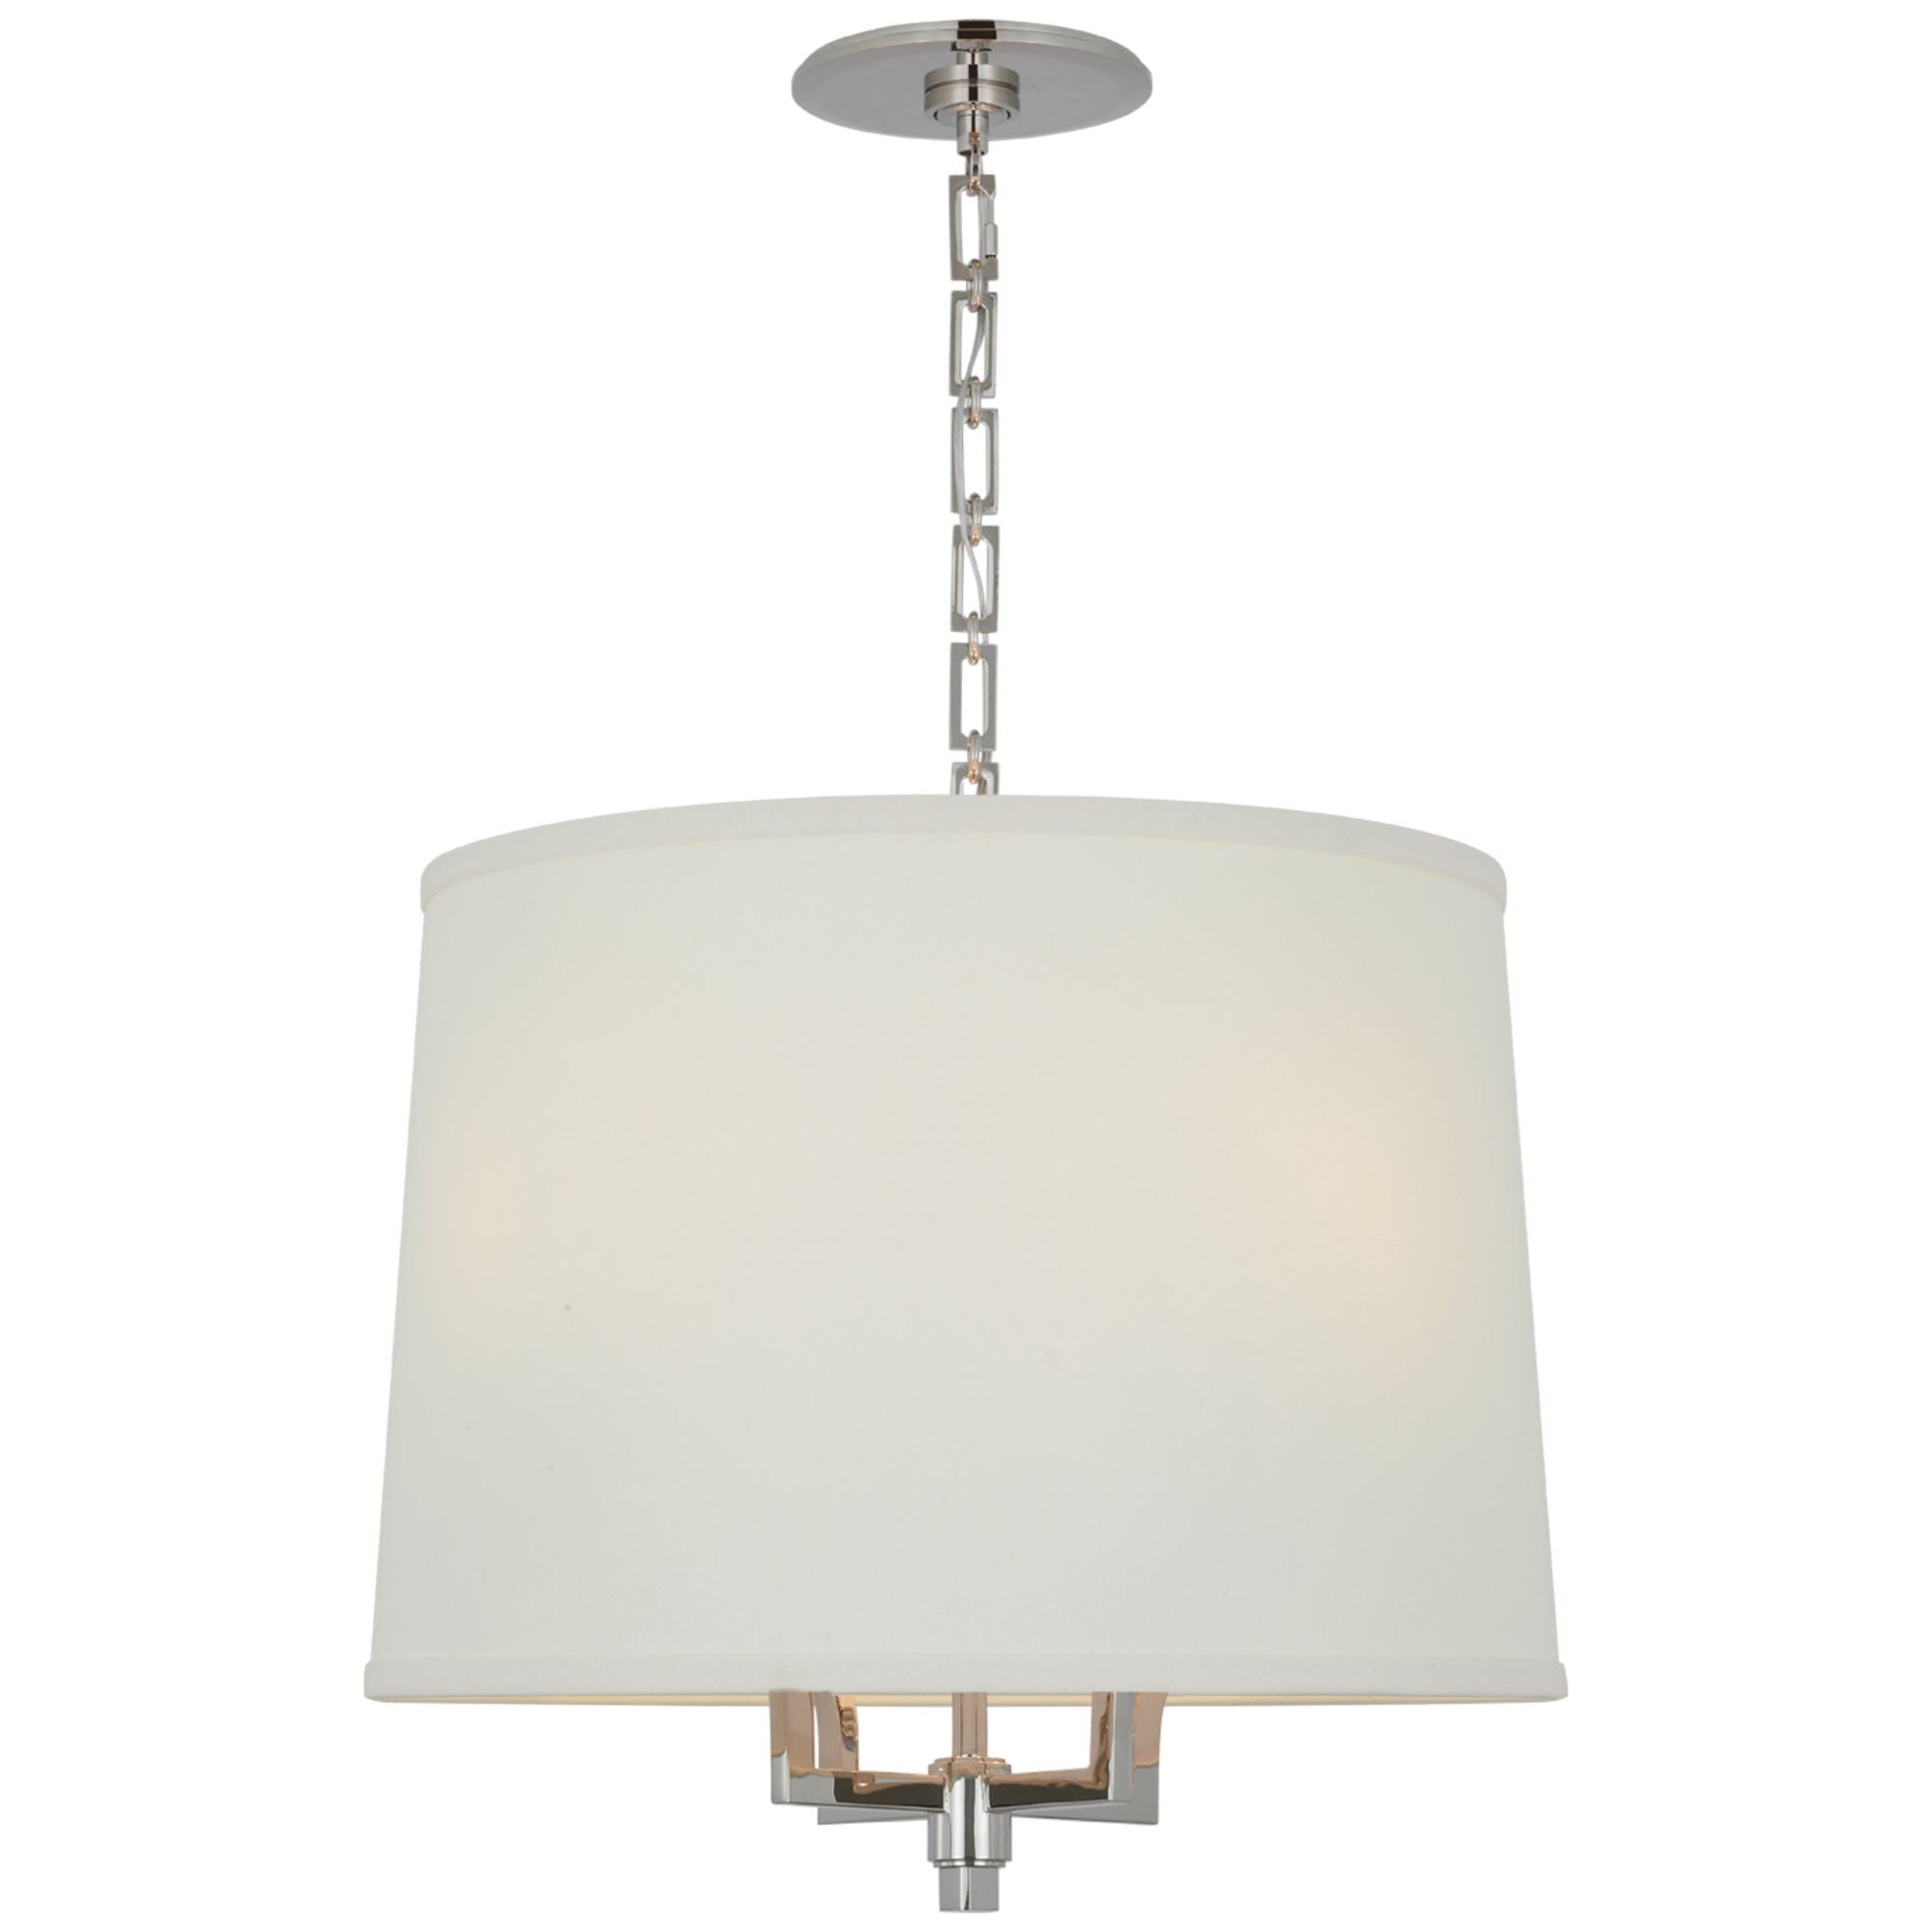 Barbara Barry Westport Large Hanging Shade in Polished Nickel with Linen Shade